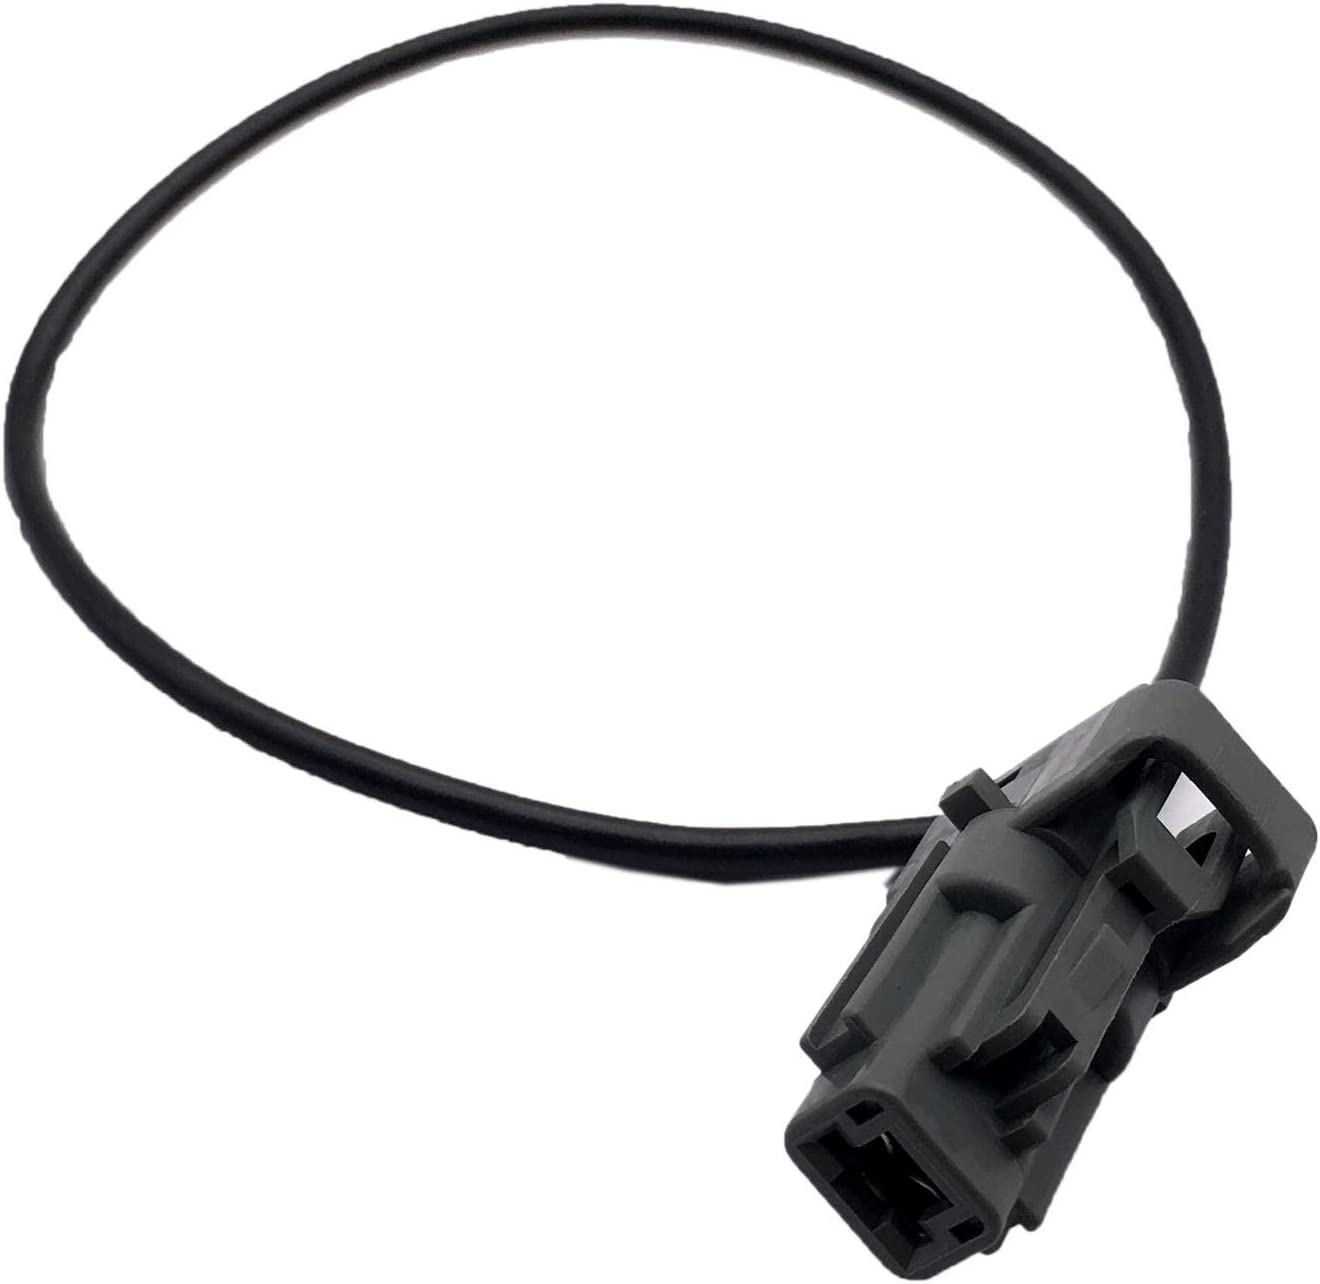 Aokus Compatible with Hyundai Starter Motor Solenoid Connector Pigtail Plug Repair Harness